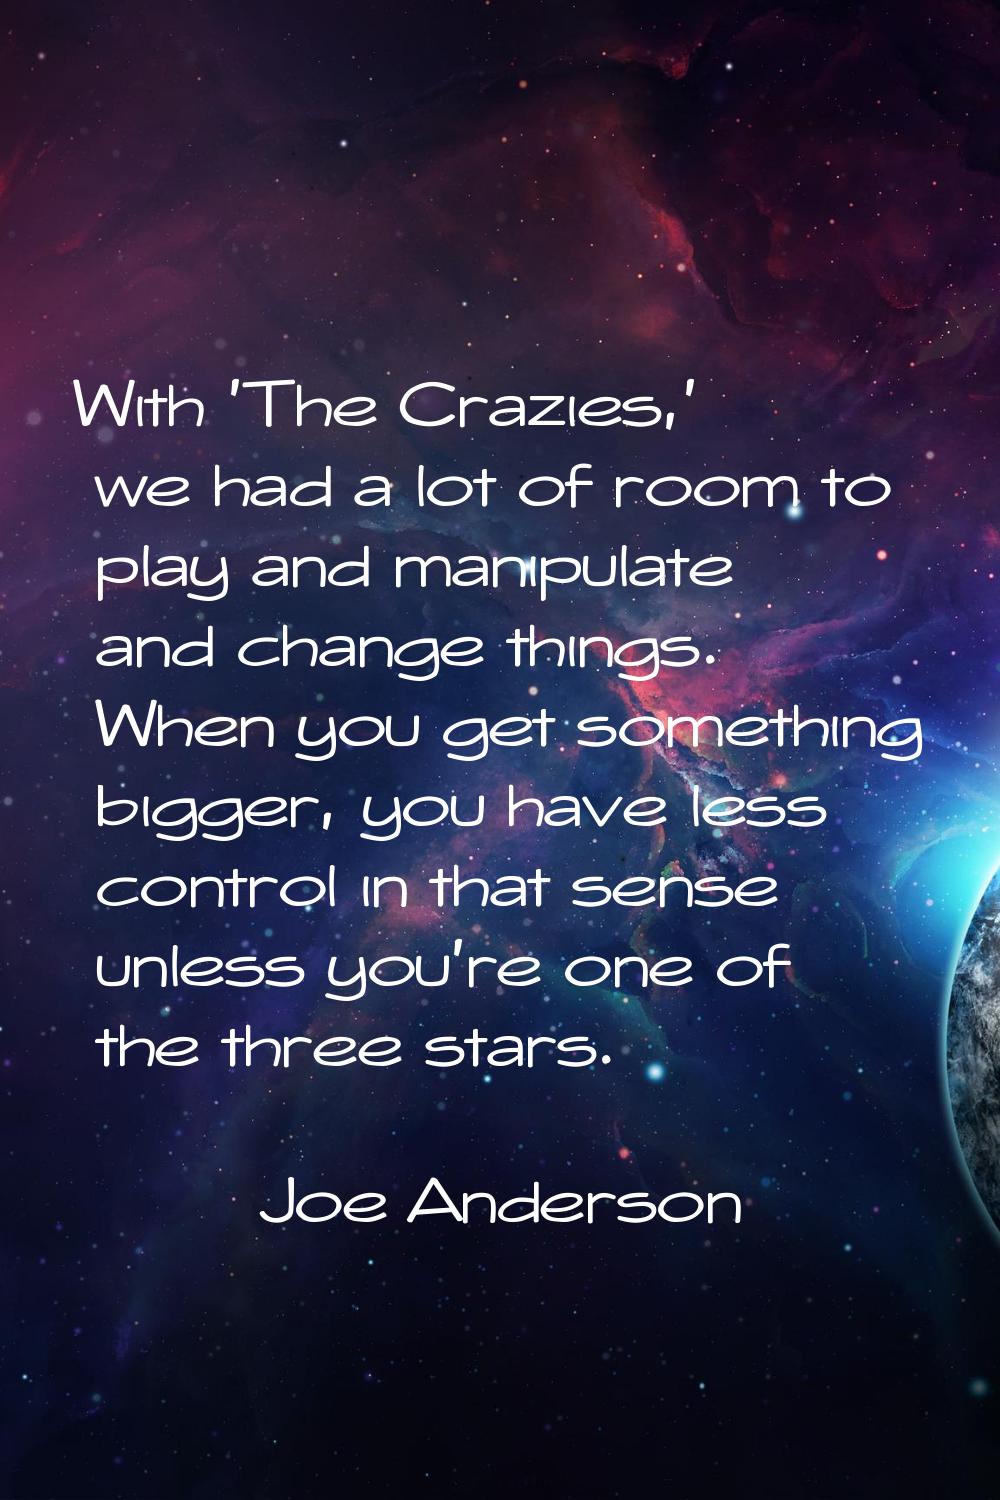 With 'The Crazies,' we had a lot of room to play and manipulate and change things. When you get som